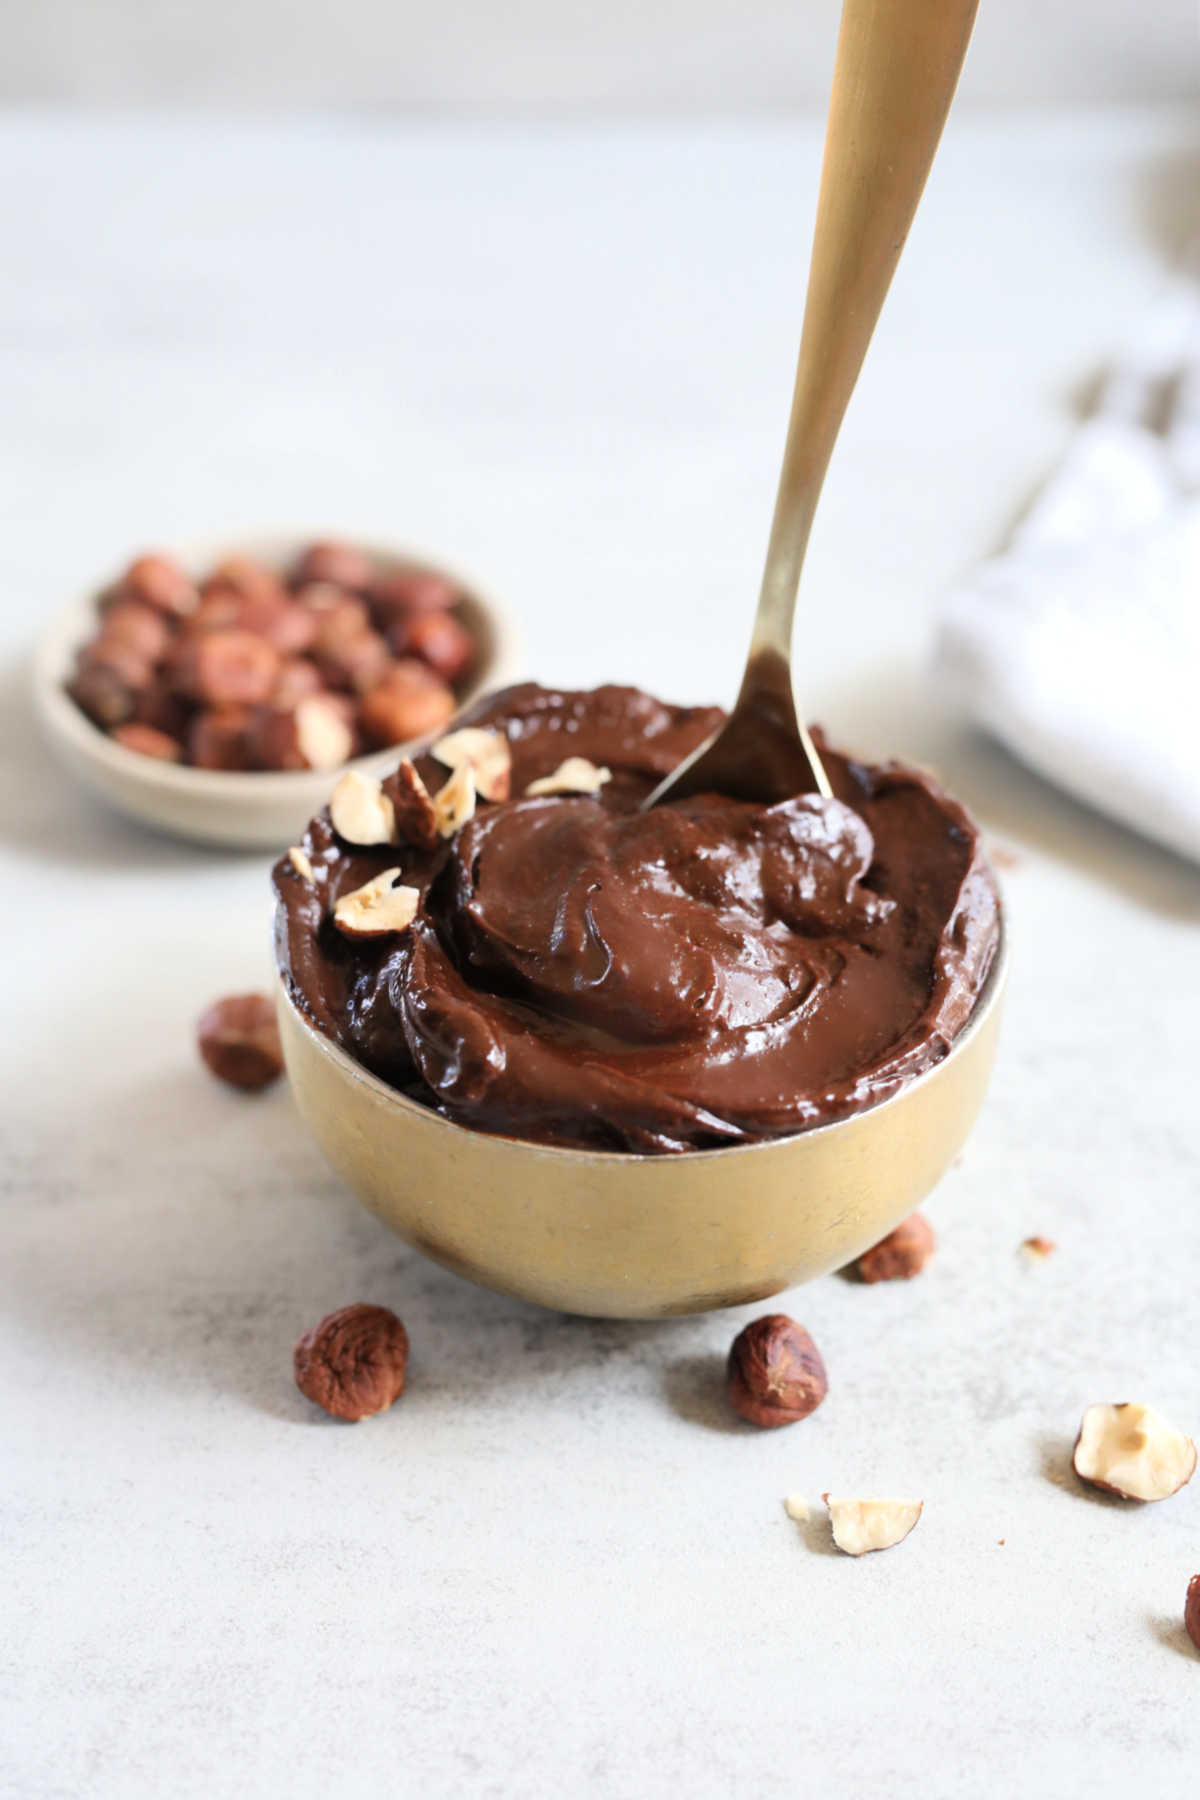 healthy chocolate hazelnut spread made from scratch at home in a gold bowl with a spoon